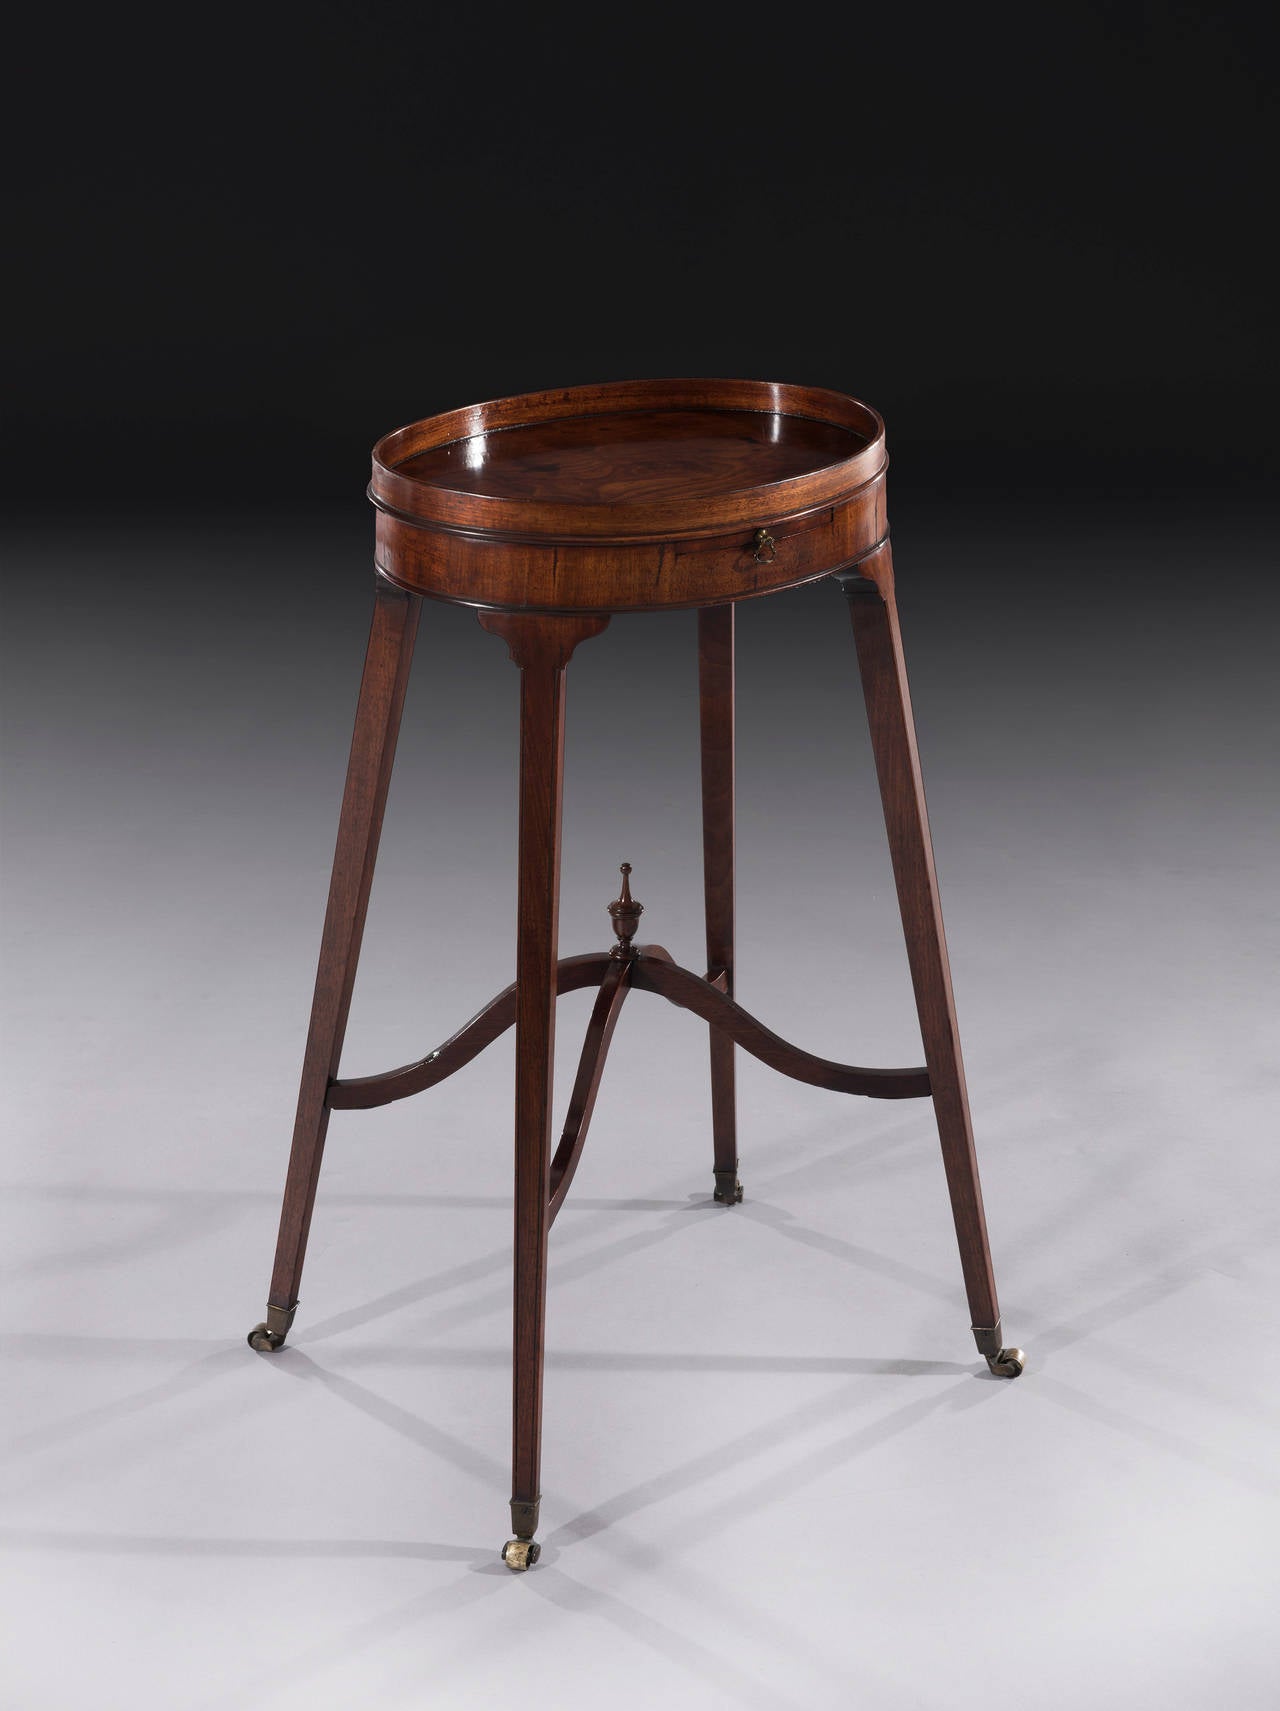 The George III oval shaped urn stand in the manner of George Hepplewhite retains a great colour and patina. The highly figured oval top with a low gallery sits on a mahogany veneered frieze with a centre pull-out slide. The four finely tapered legs